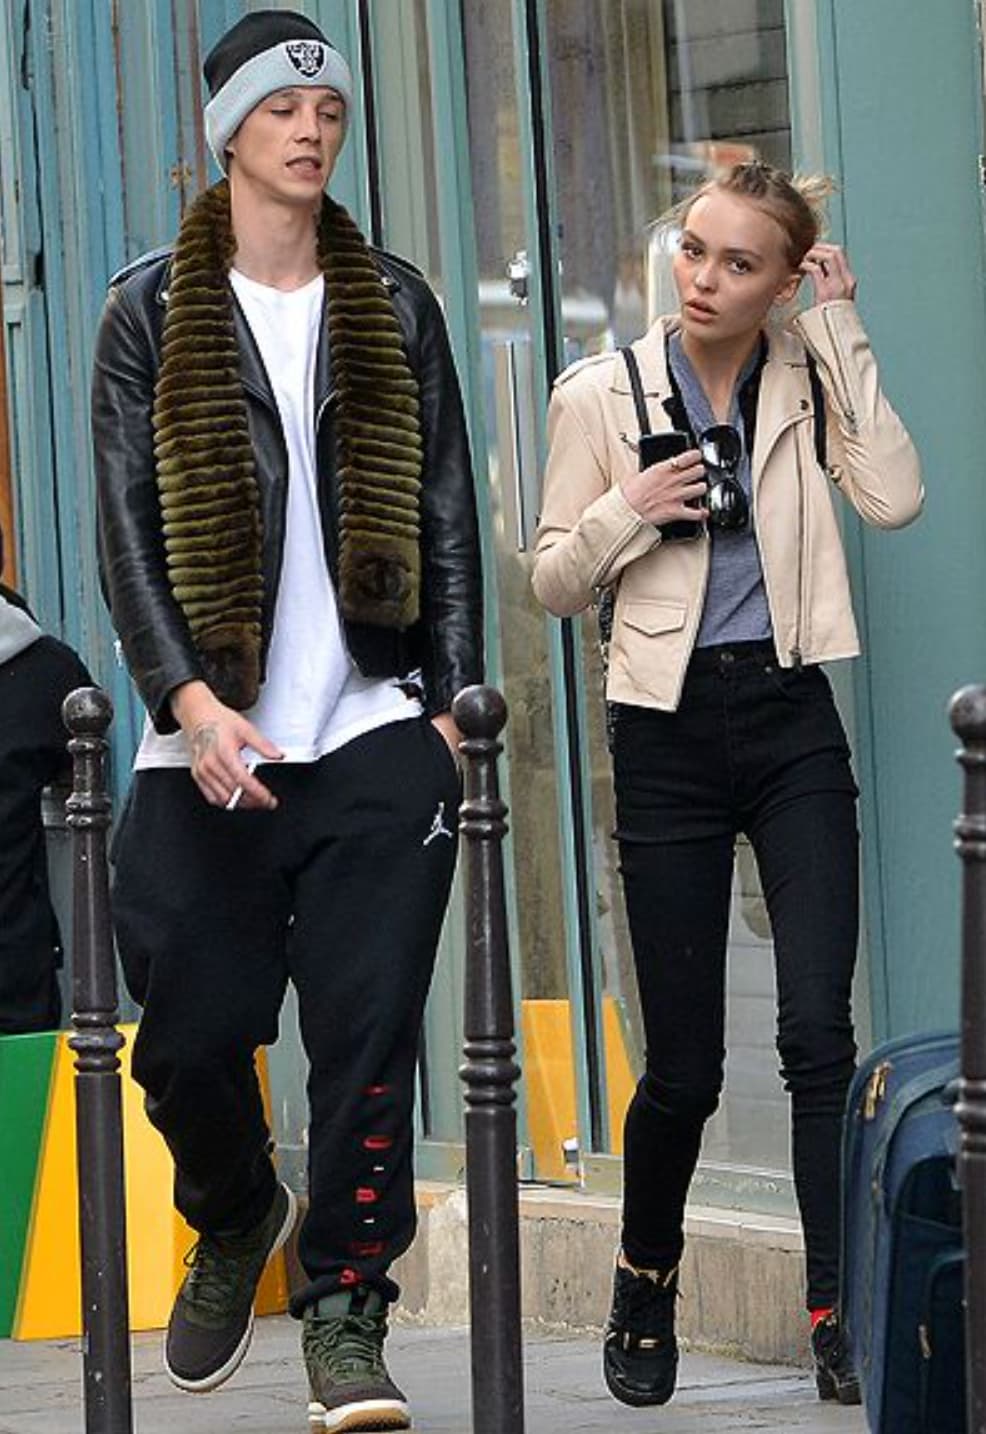 “Lily-Rose Depp was only 16 when she reportedly began dating 24-year-old model Ash Stymest (who had previously been married and had a child). In fact, Stymest even joined her family on vacation a few months after they reportedly began dating. They're rumored to have broken up after two and a half years, at which point they'd still never confirmed their relationship.”